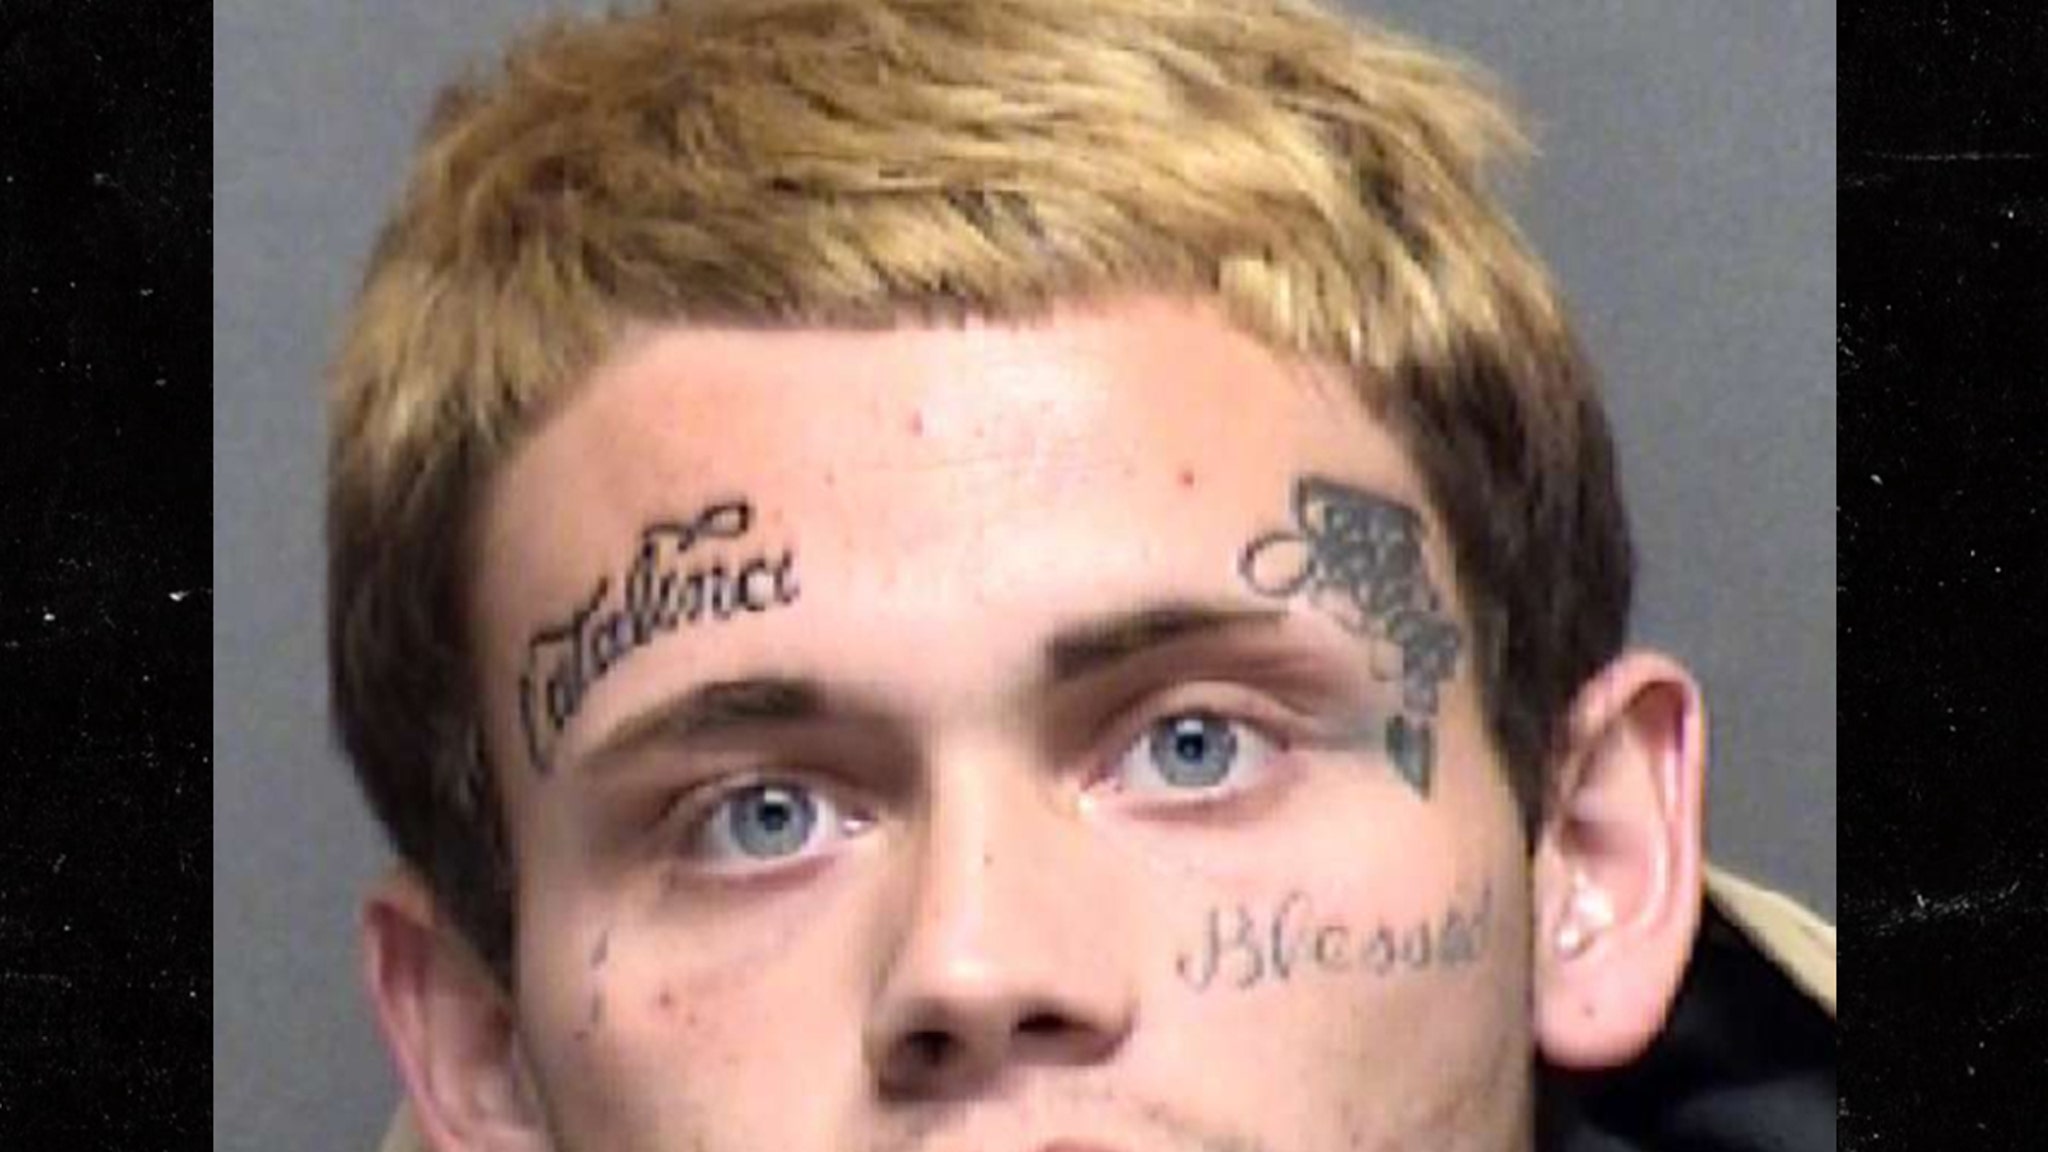 Texas Teen Arrested for Carving Name Into Girlfriend's Forehead